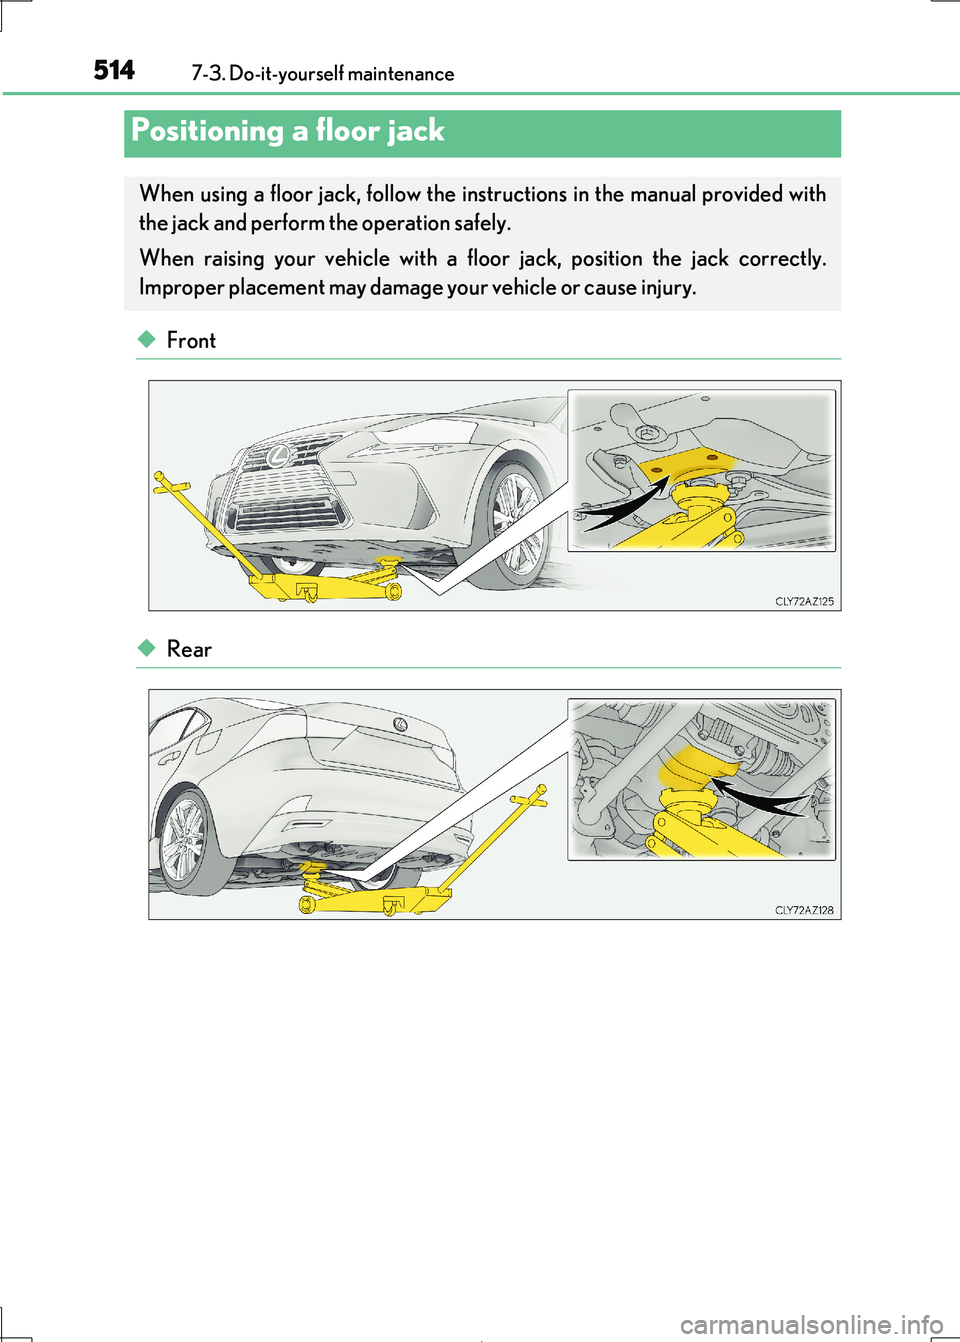 Lexus IS300h 2017  Owners Manual 5147-3. Do-it-yourself maintenance
IS300h_EE(OM53D89E)
◆Front
◆Rear
Positioning a floor jack
When using a floor jack, follow the instructions in the manual provided with 
the jack and perform the 